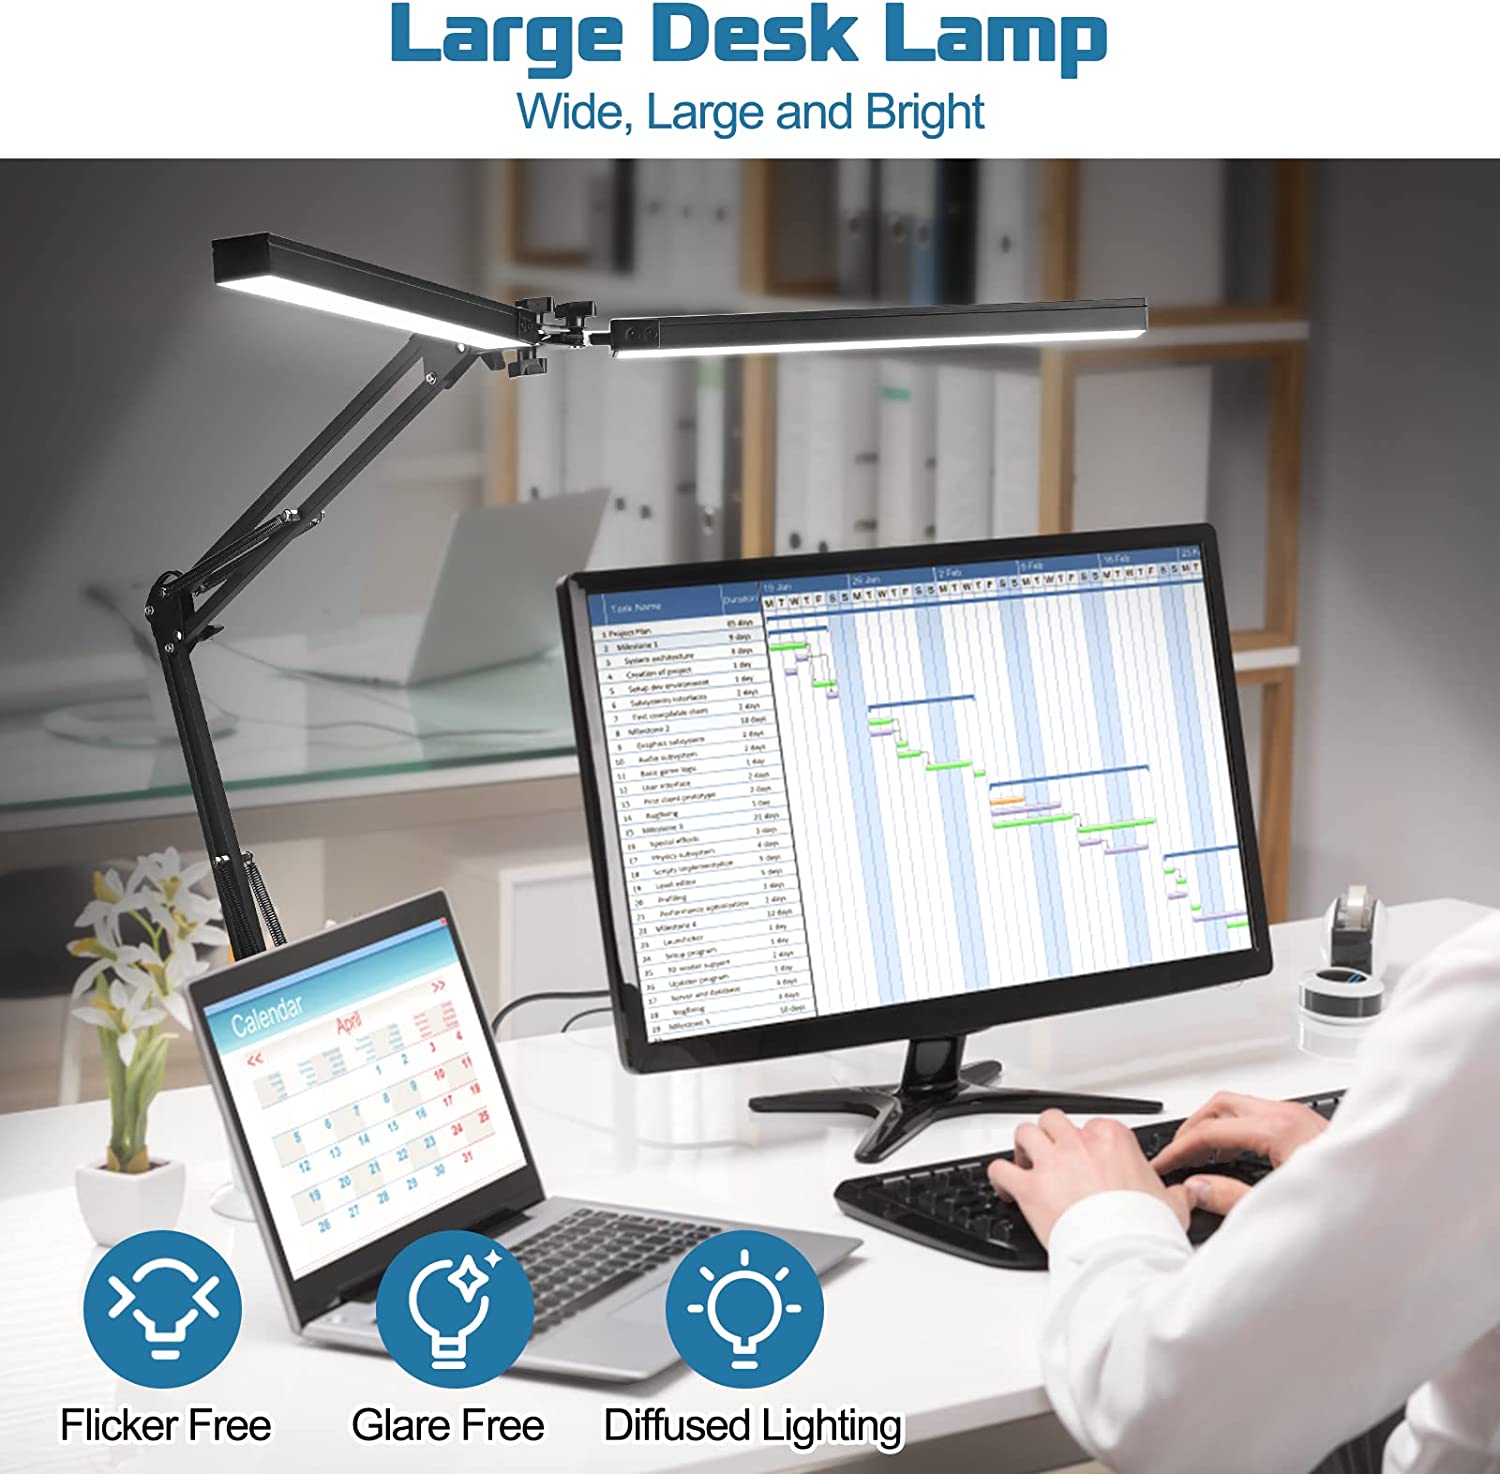 America Metal Aluminium Double Head Led Desk Lamp Clip Clamp Eye Protection Two Heads Lighting Computer Screen Light Table Architect Long Arm Reading Lamp with Adapter for Office Working Design